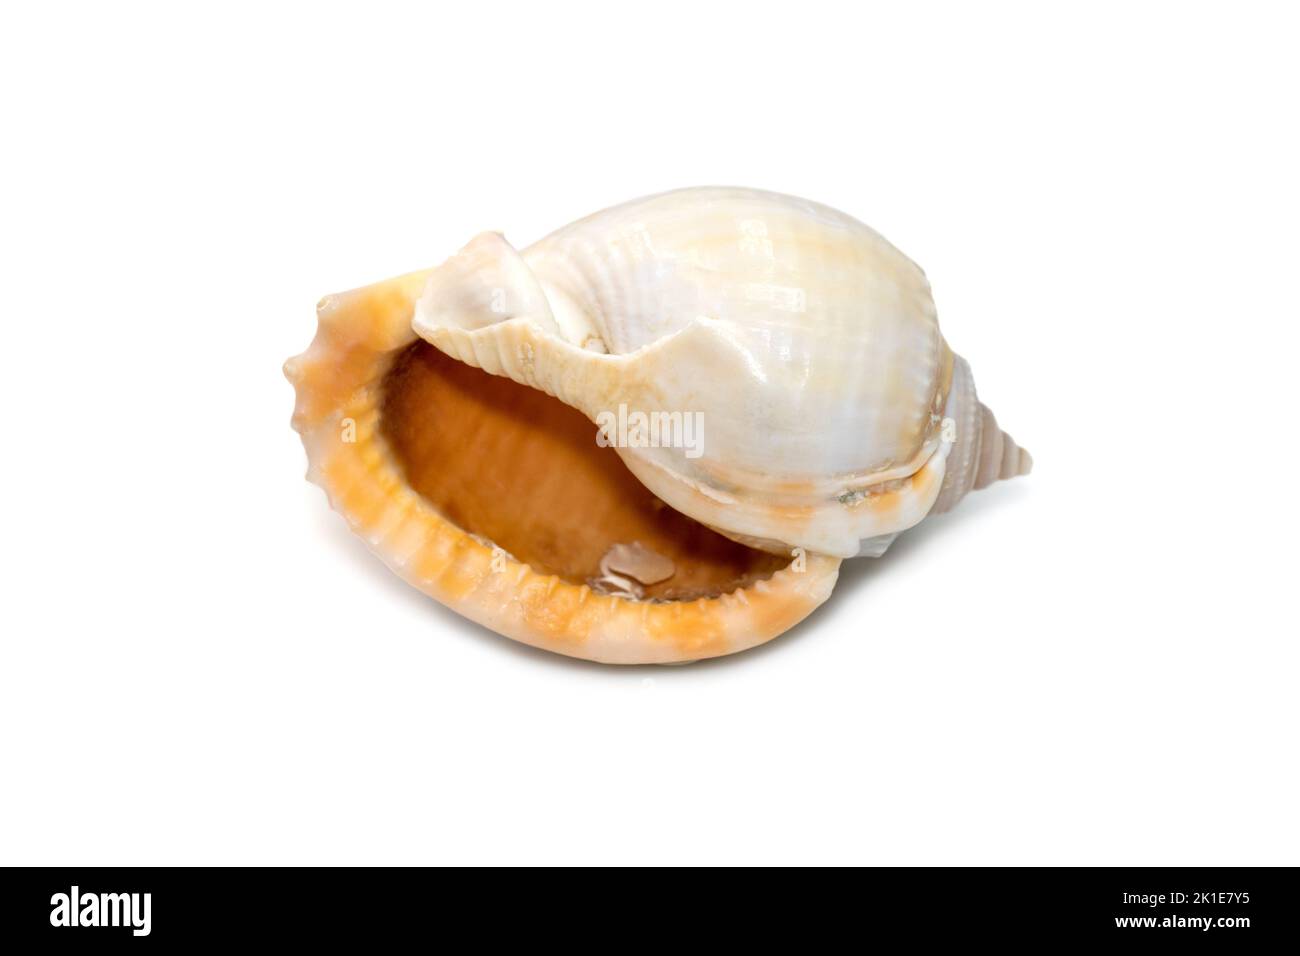 Image of phalium glaucum shell, common name the grey bonnet or glaucus bonnet, is a species of large sea snail, a marine gastropod mollusk in the fami Stock Photo